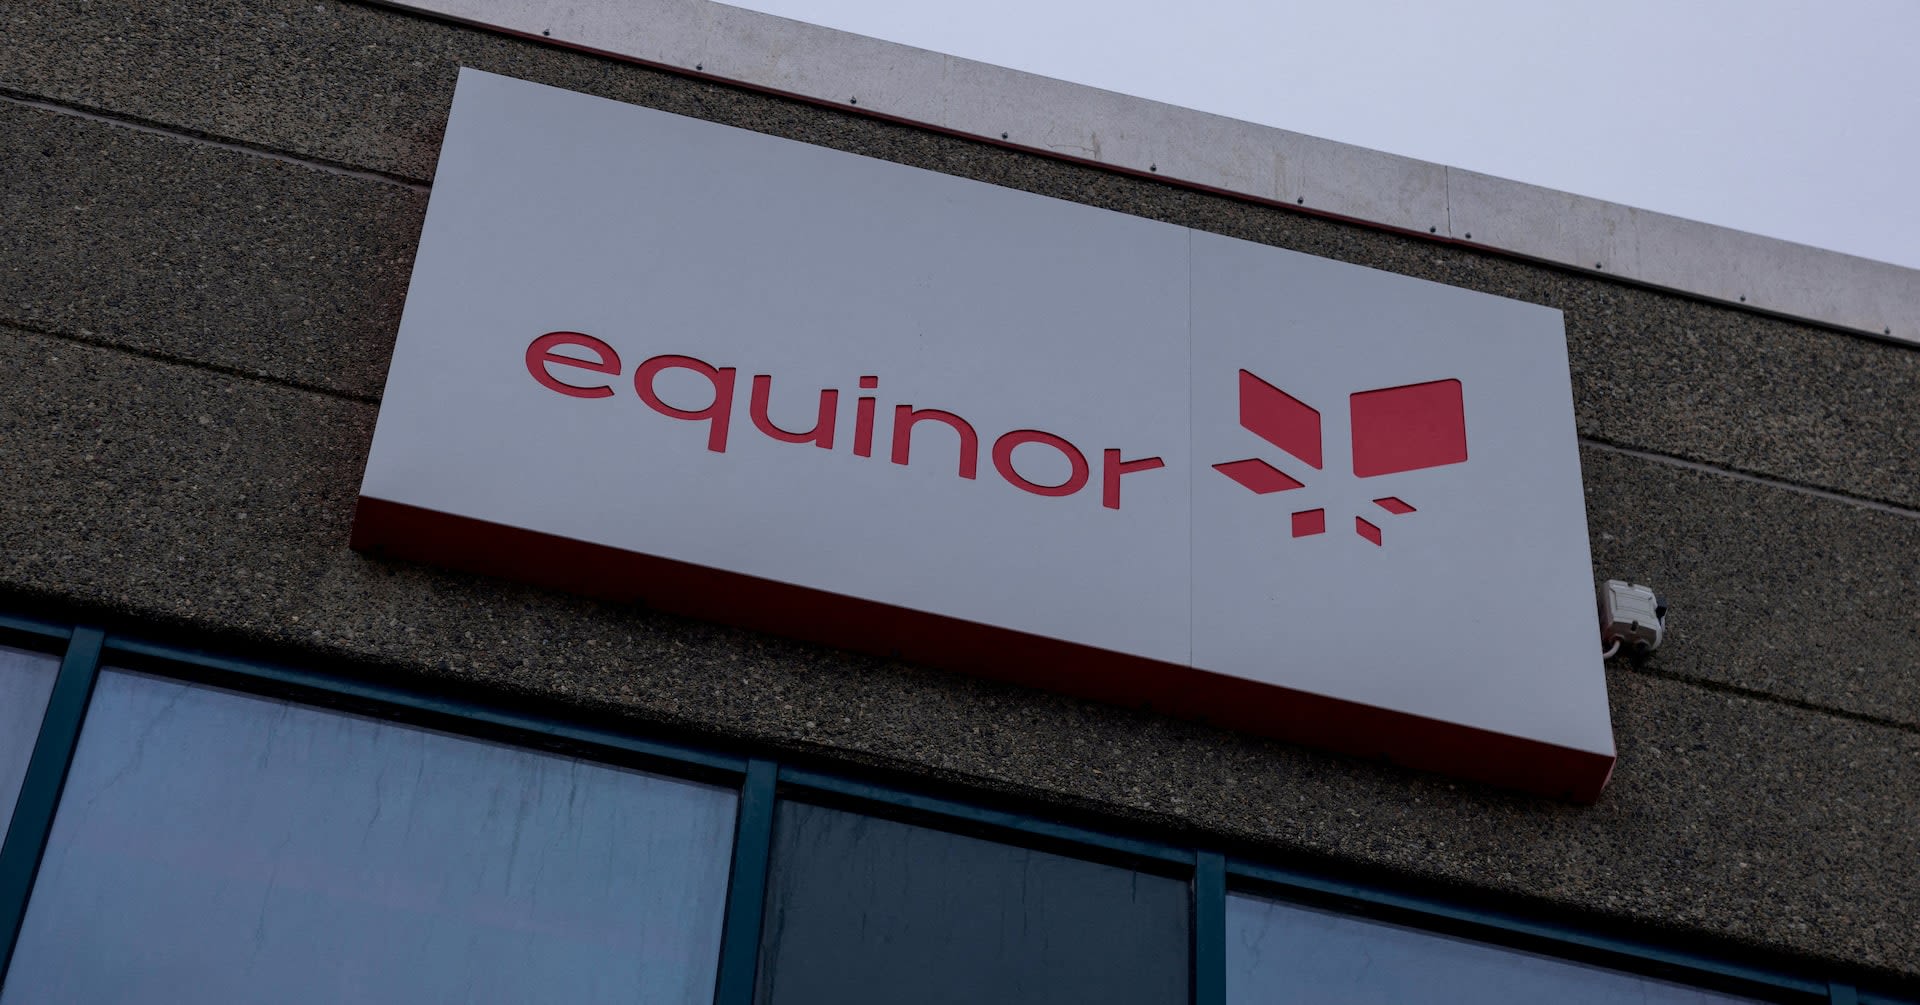 Equinor and Petoro swap Norwegian oil and gas assets